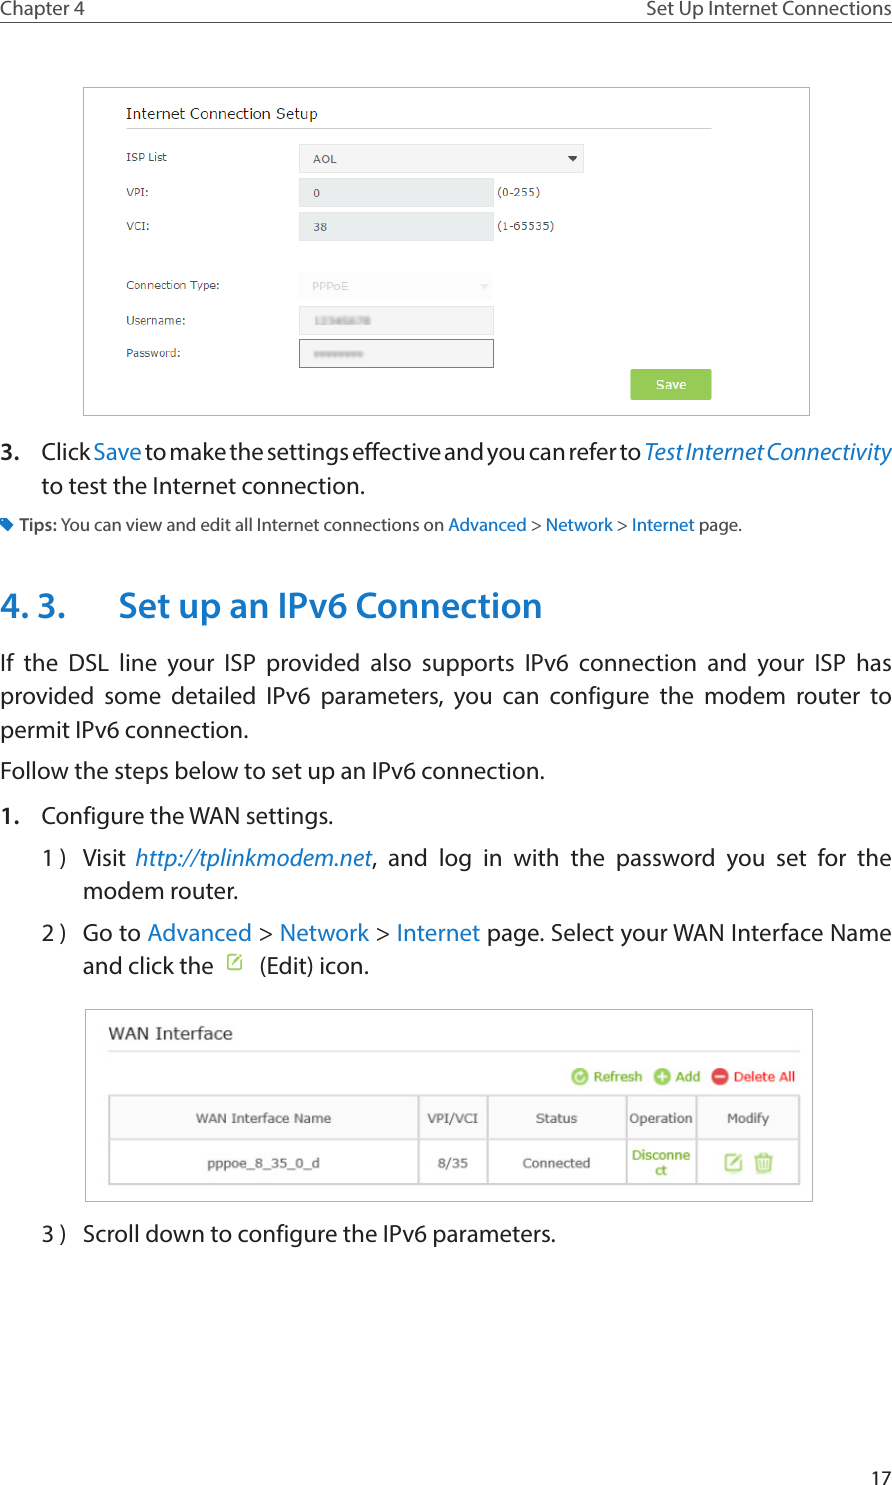 17Chapter 4 Set Up Internet Connections3.  Click Save to make the settings effective and you can refer to Test Internet Connectivity to test the Internet connection.Tips: You can view and edit all Internet connections on Advanced &gt; Network &gt; Internet page.4. 3.  Set up an IPv6 ConnectionIf the DSL line your ISP provided also supports IPv6 connection and your ISP has provided some detailed IPv6 parameters, you can configure the modem router to permit IPv6 connection.Follow the steps below to set up an IPv6 connection.1.  Configure the WAN settings.1 )  Visit  http://tplinkmodem.net, and log in with the password you set for the modem router.2 )  Go to Advanced &gt; Network &gt; Internet page. Select your WAN Interface Name and click the    (Edit) icon.  3 )  Scroll down to configure the IPv6 parameters.